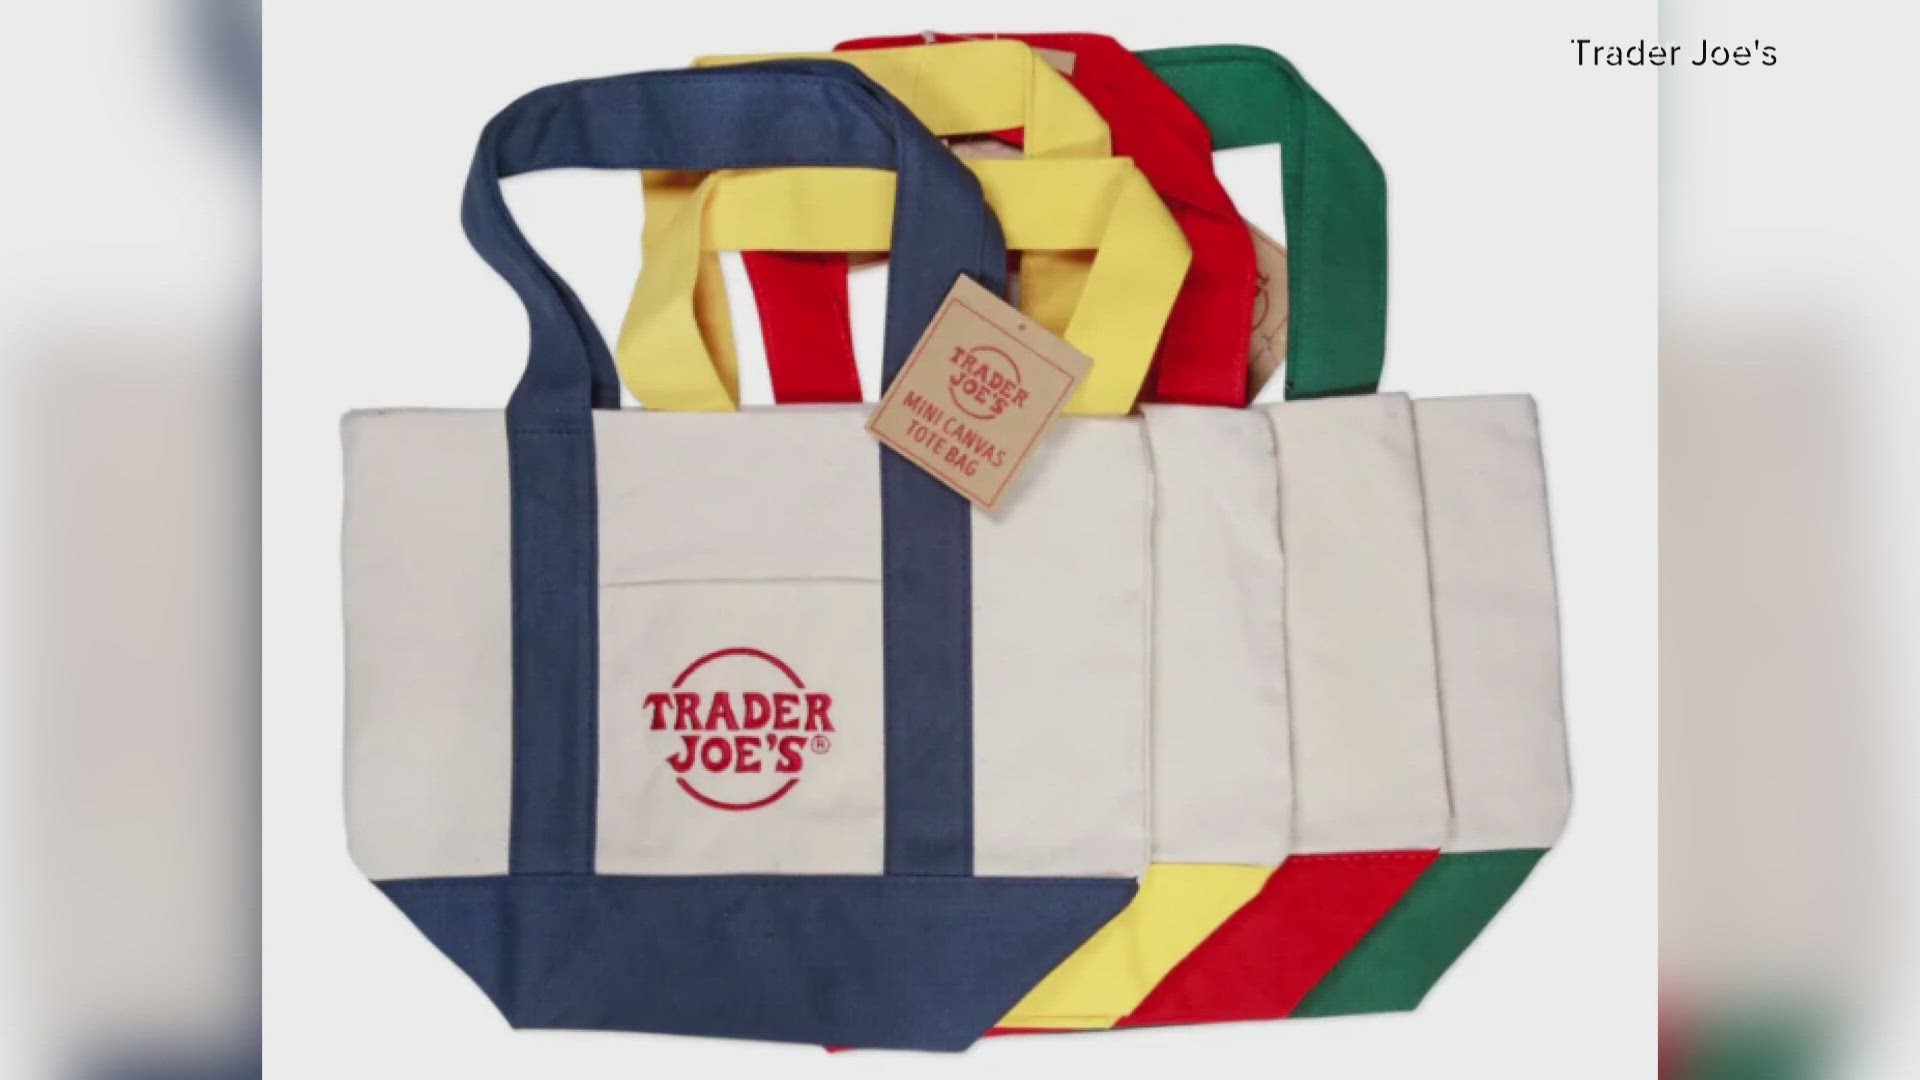 CNN says the $3 tote bags are being resold on eBay for as much as $500.